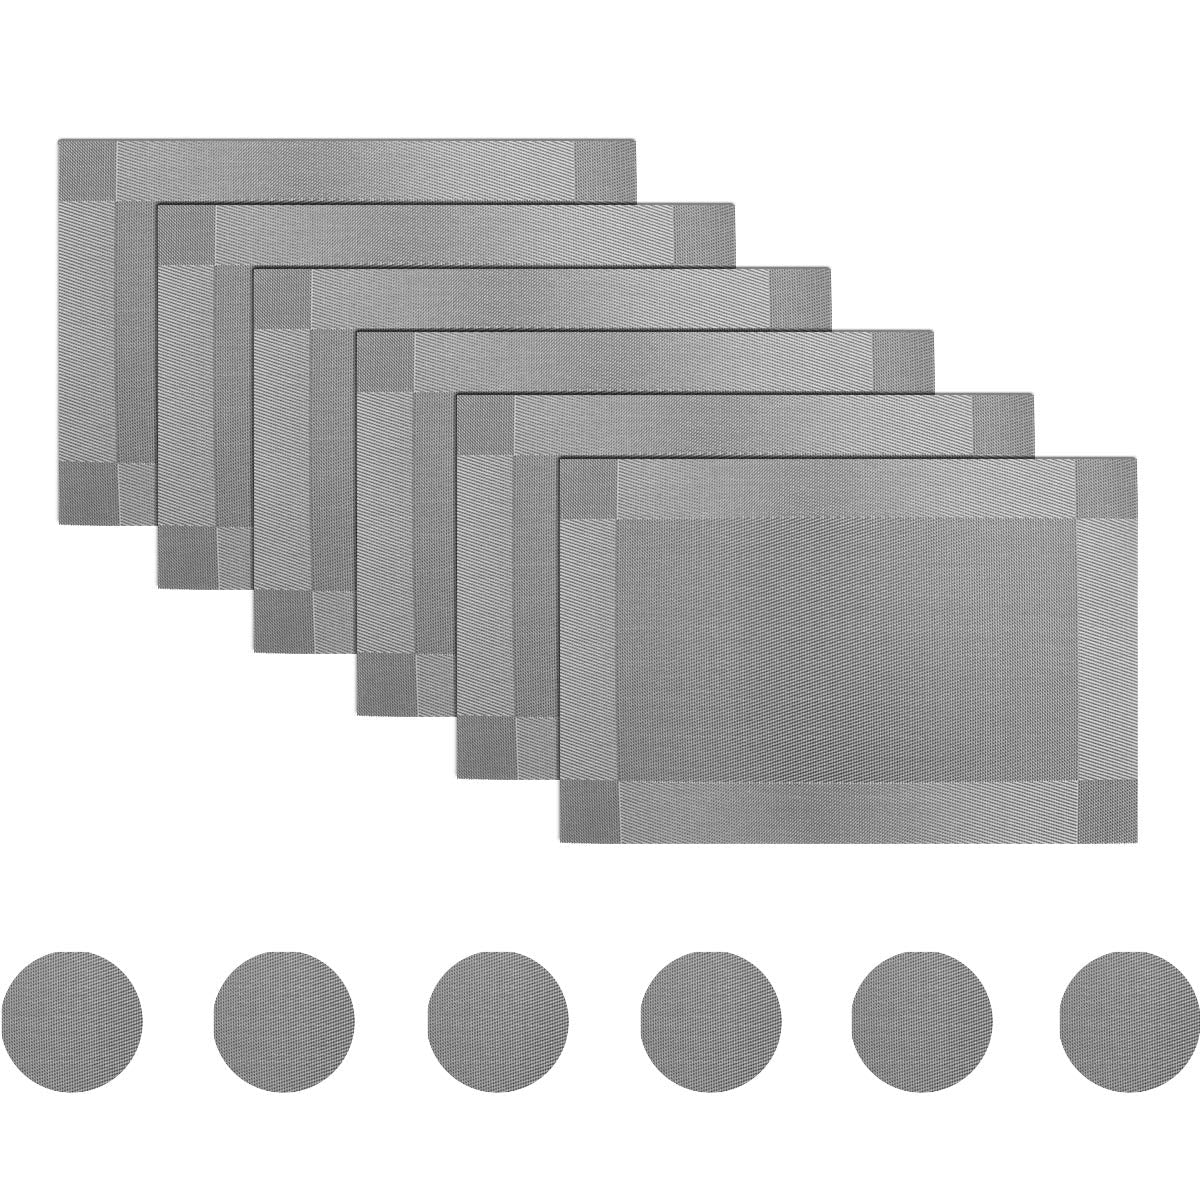 BECHEN Grey Placemats with Coasters Set of 6, Vinyl Heat-Resistant Table Mats Washable Plastic Kitchen Placemats for Dining Table Indoor Outdoor (45x30 cm)